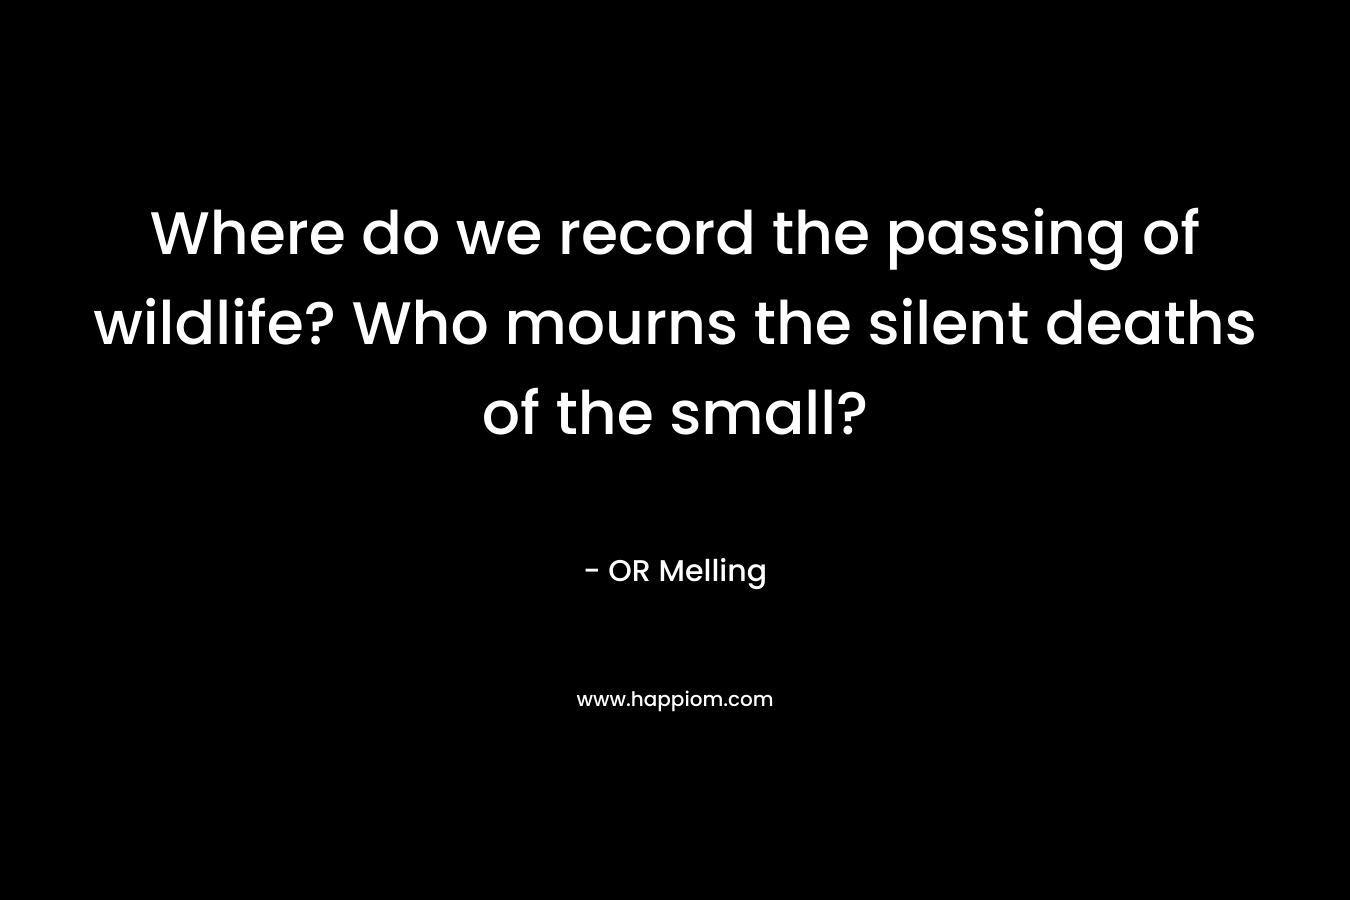 Where do we record the passing of wildlife? Who mourns the silent deaths of the small? – OR Melling